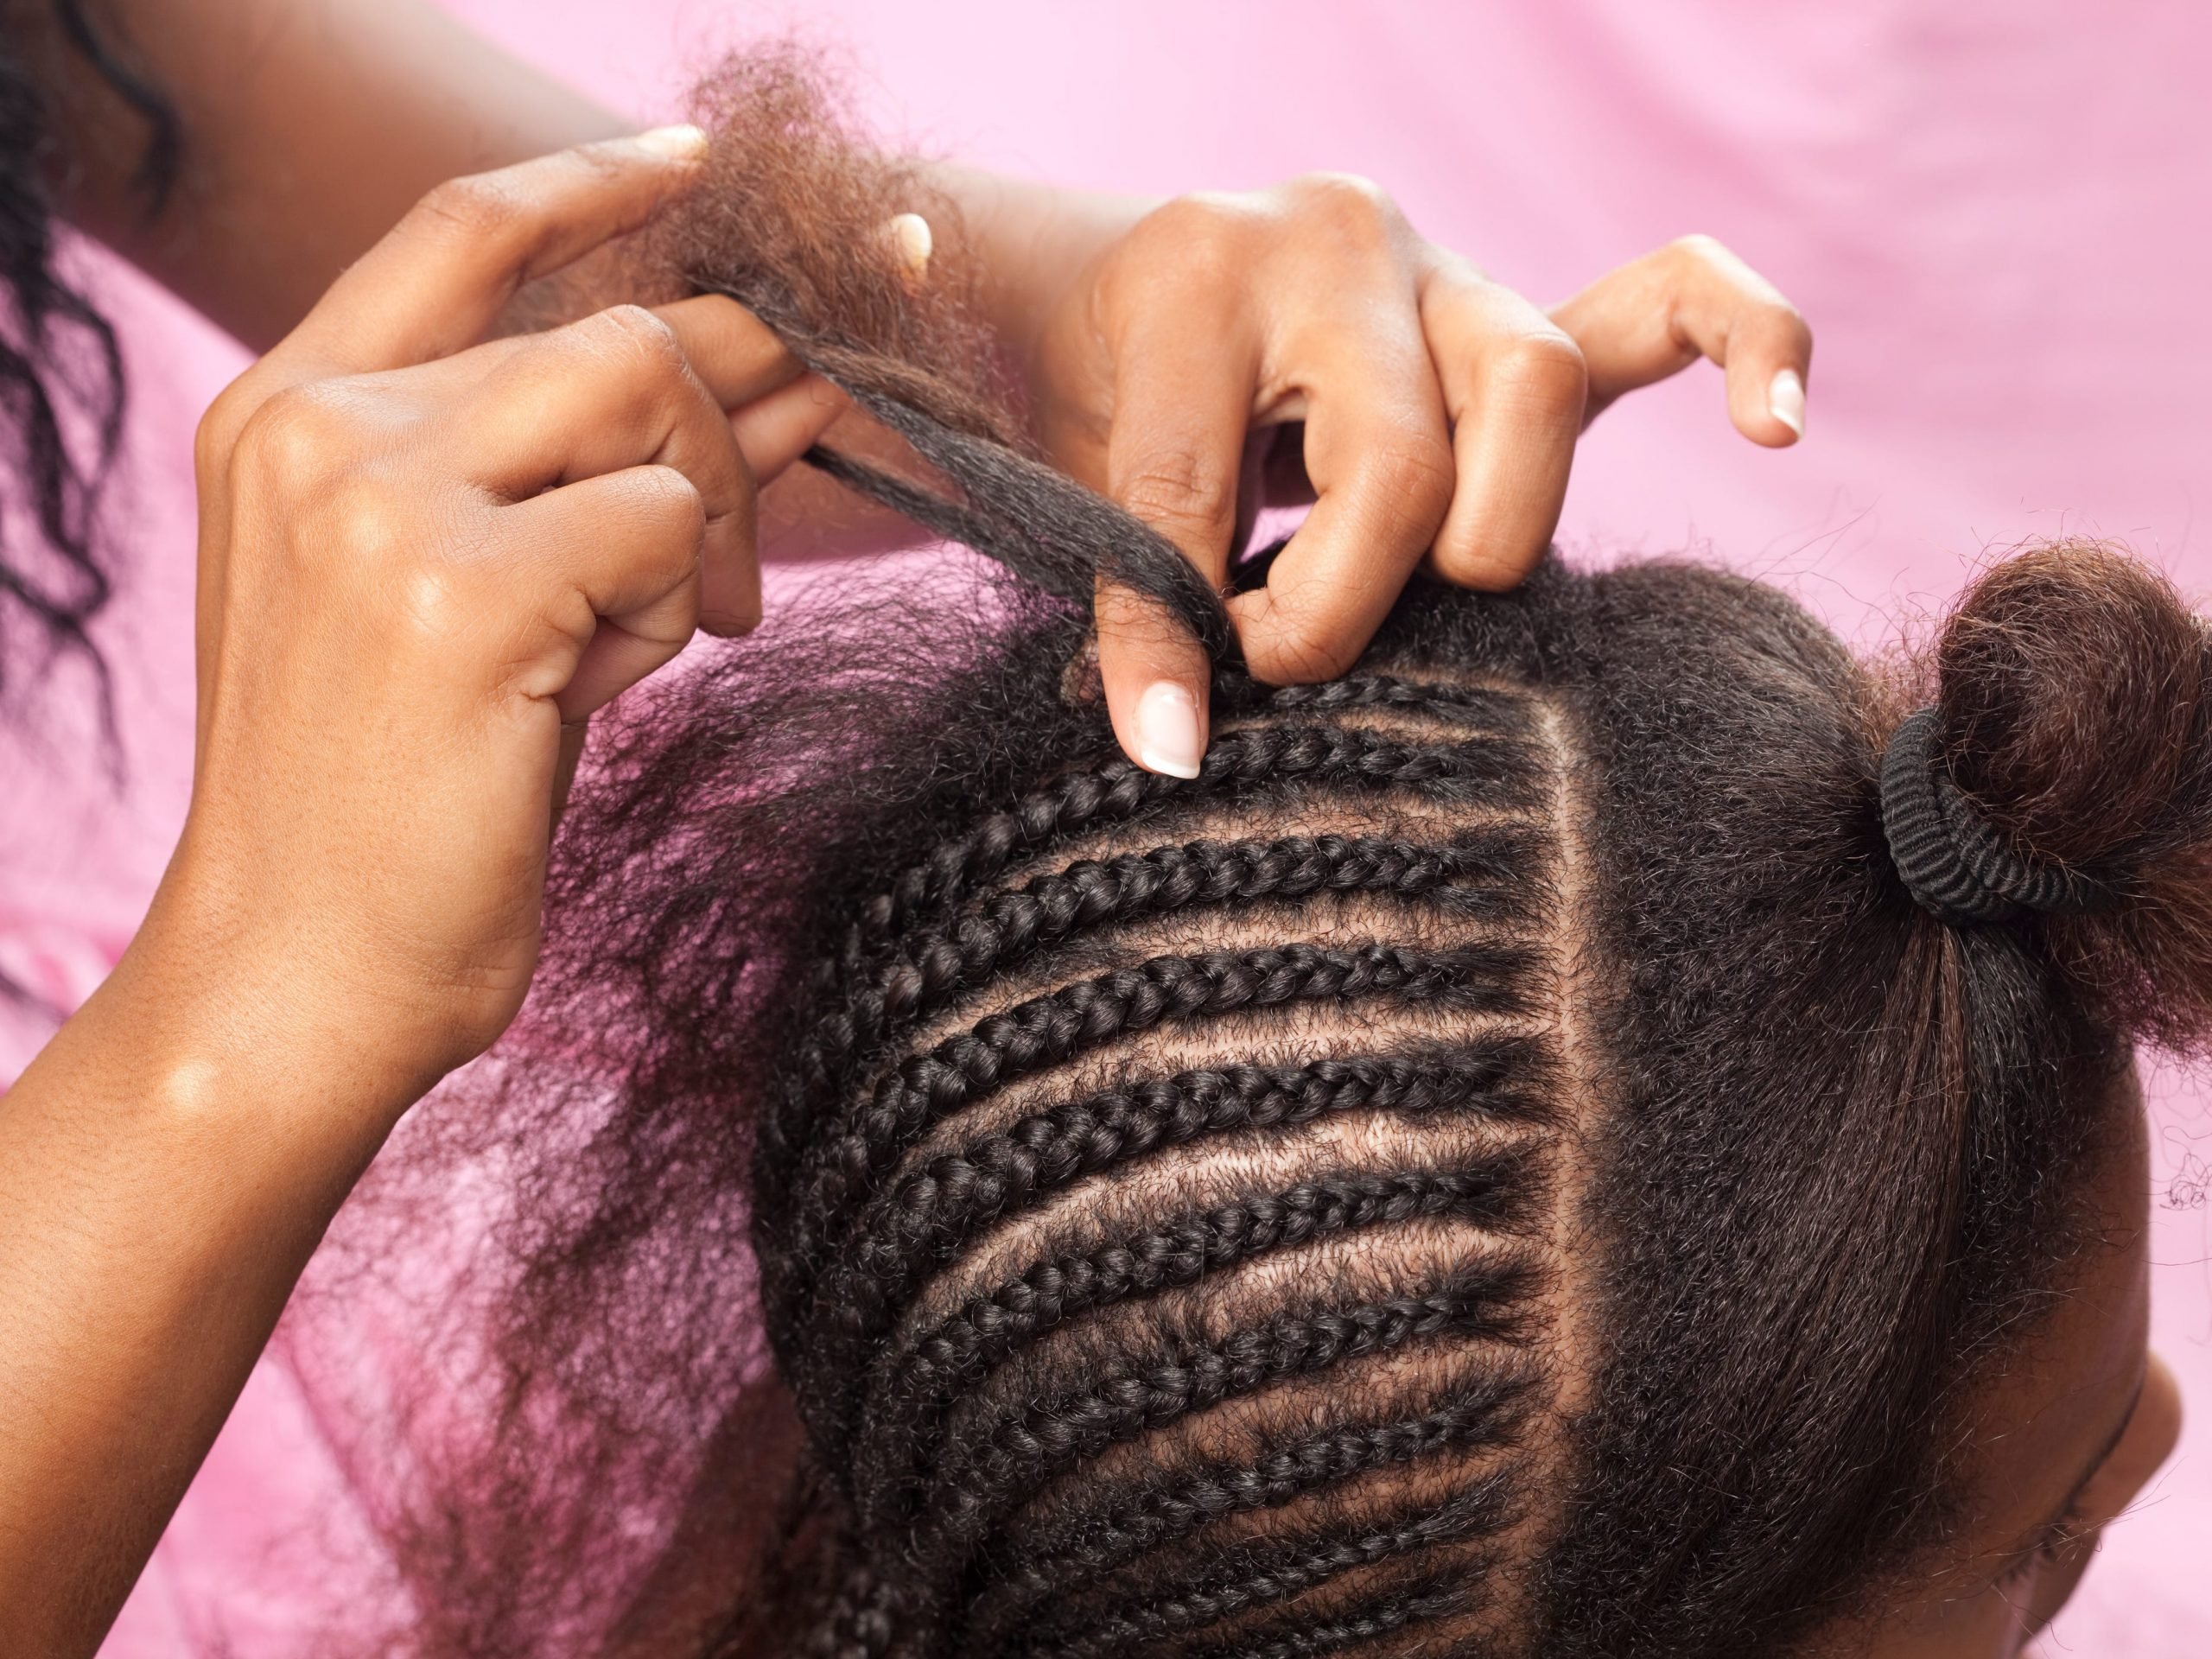 Rocking braids or cornrows can be taboo for Black women. Stylists are  fighting stigmas one style at a time